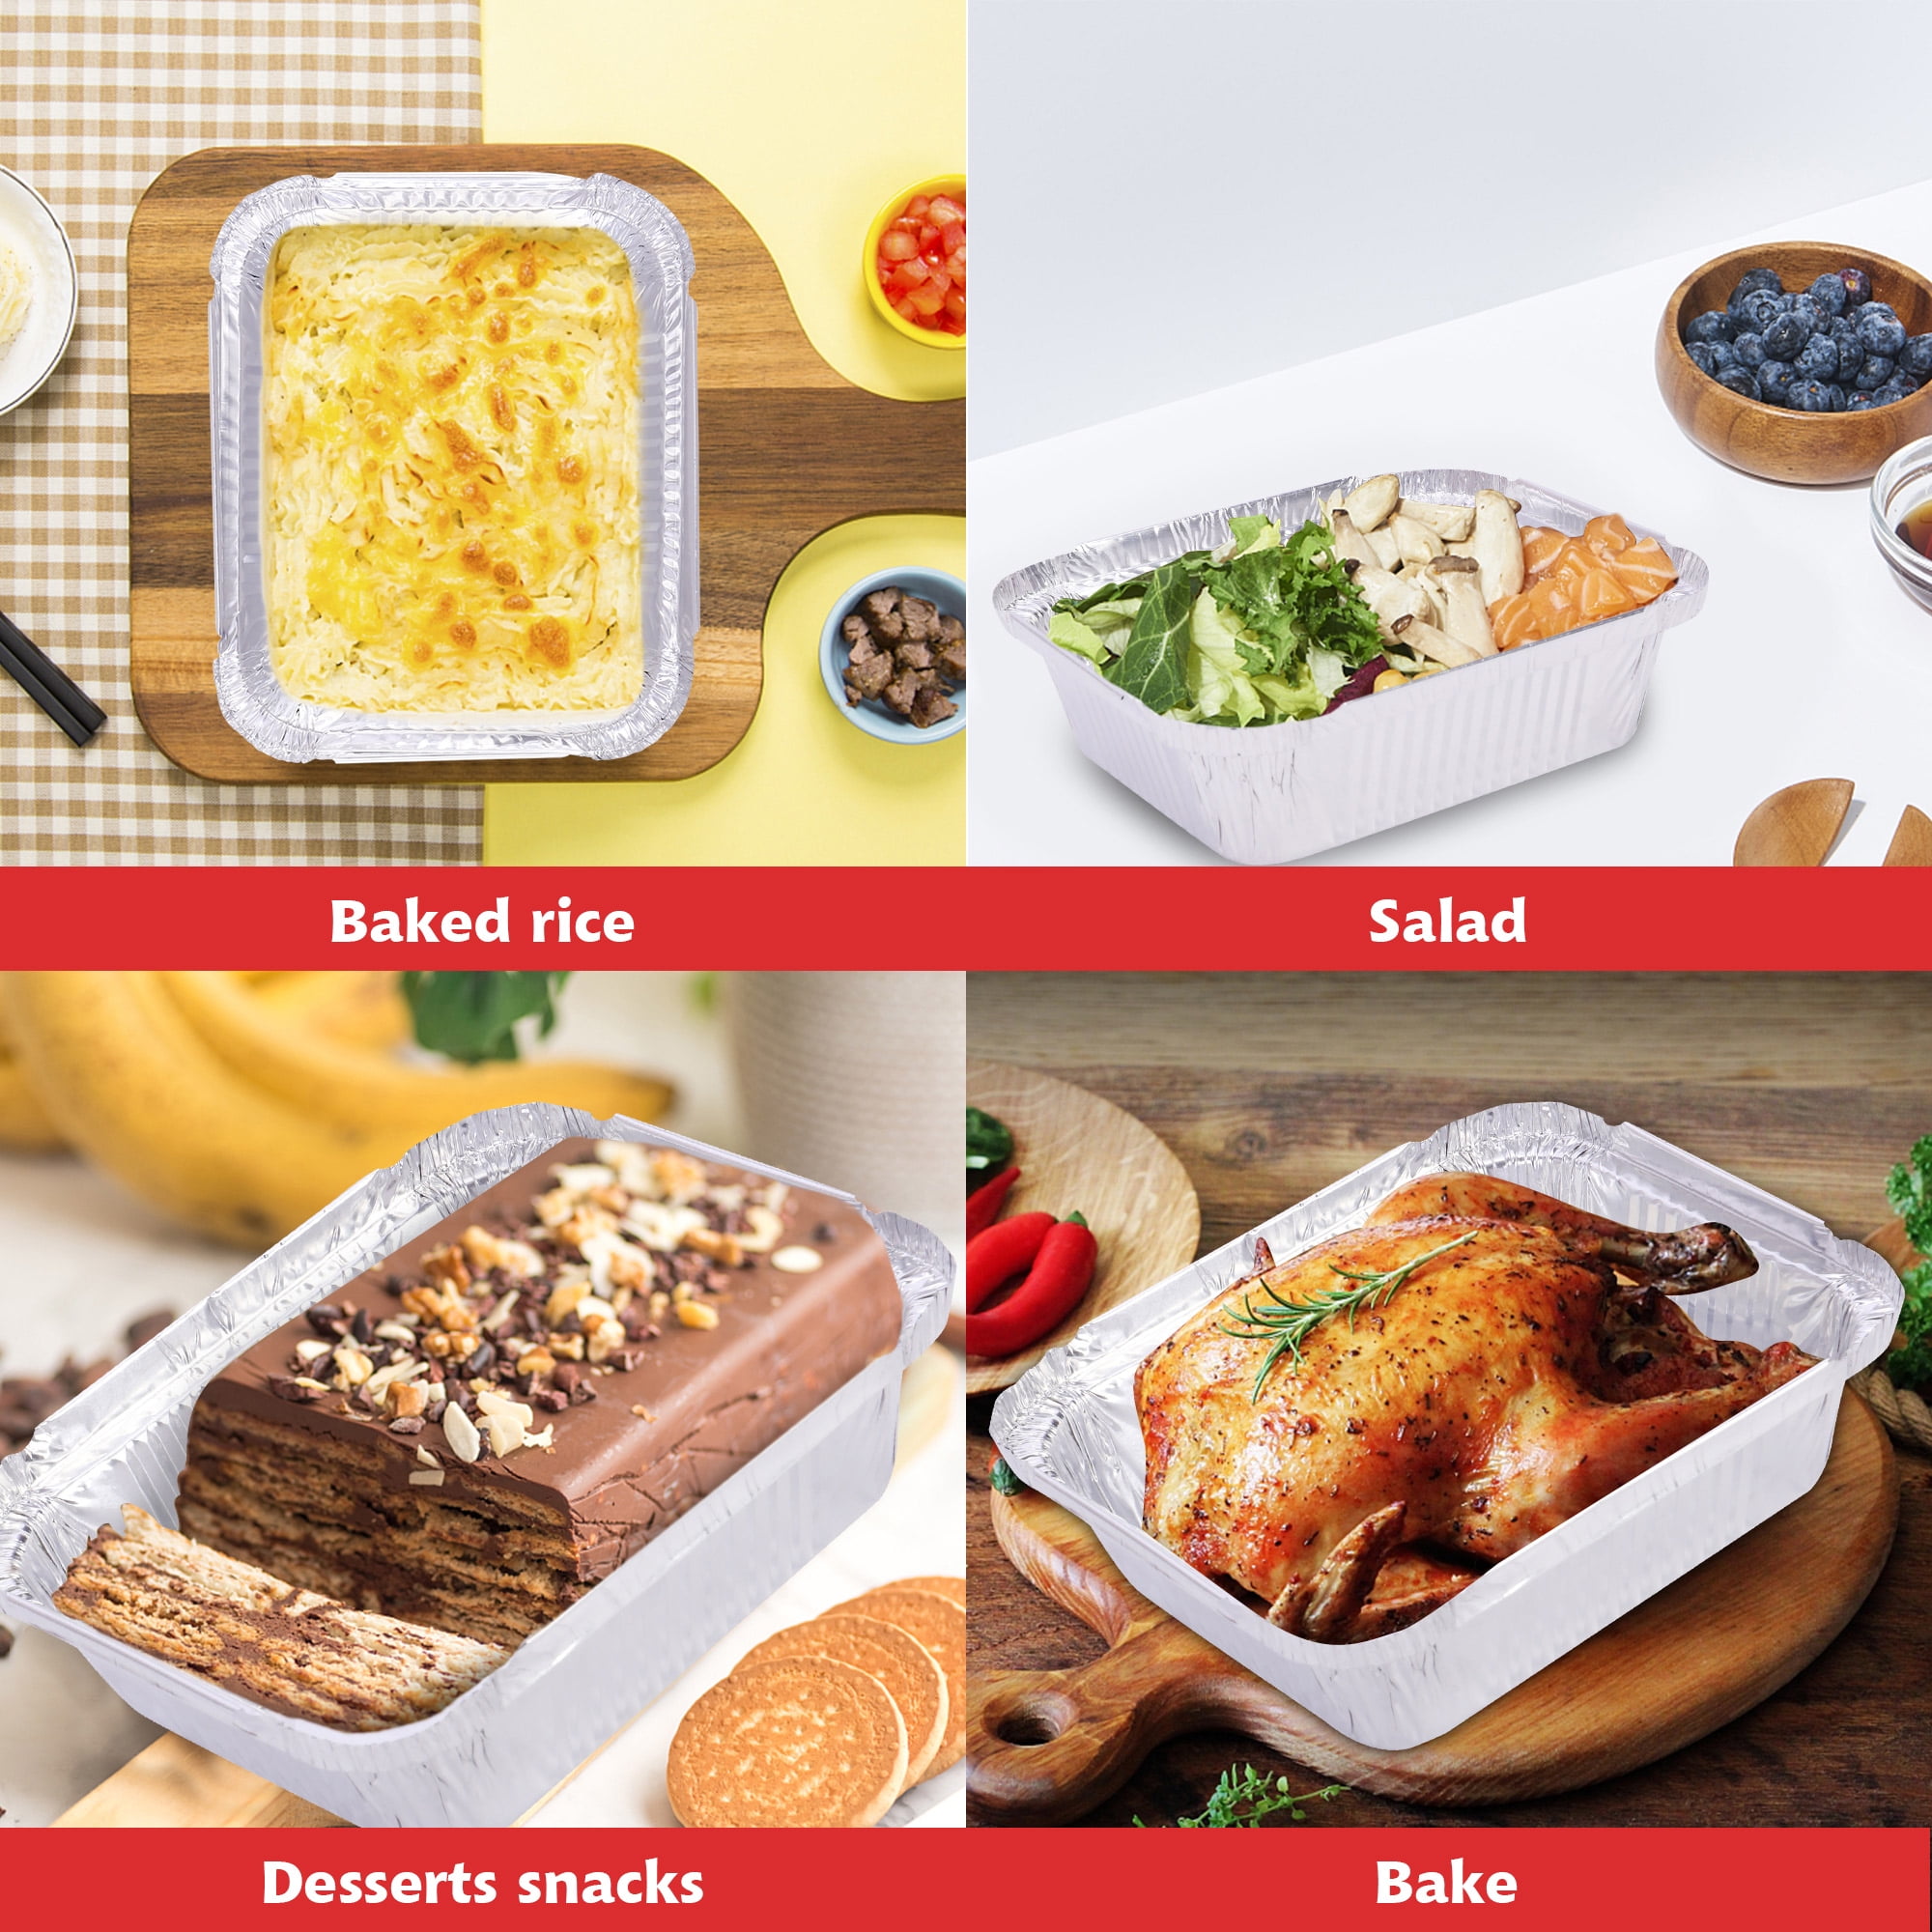 6 Christmas Holiday Plaid Disposable Aluminum Baking Pans by Celebrate  It™, 6ct.